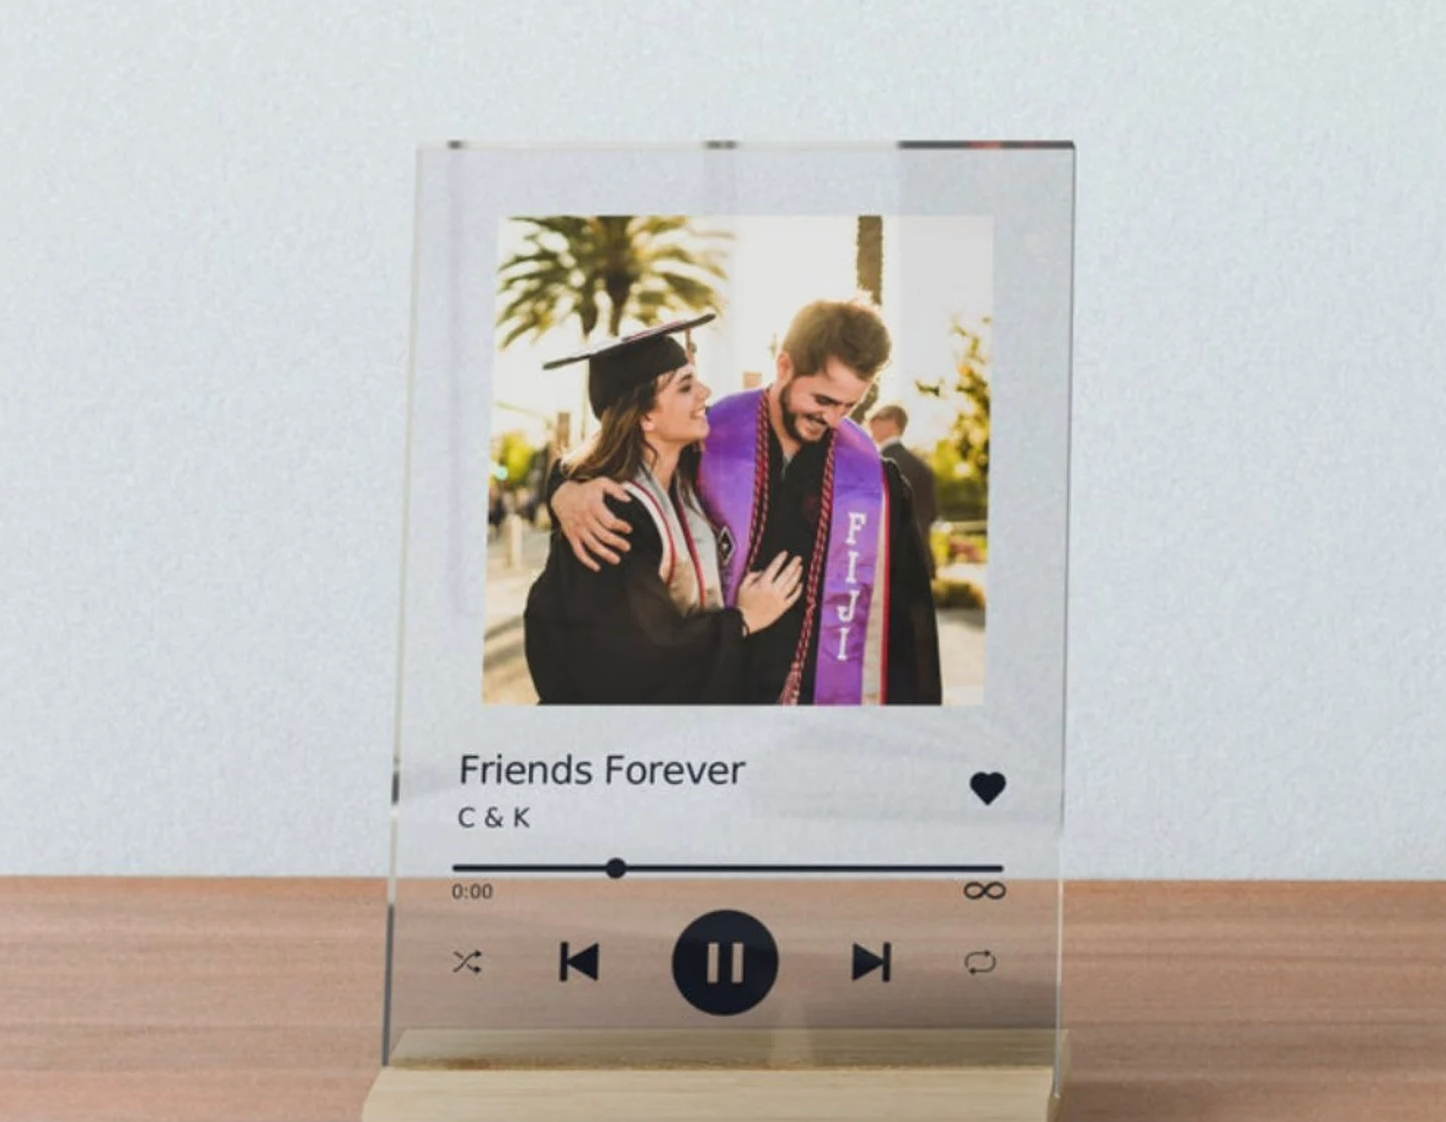 clear music setting on frame with image of friends 